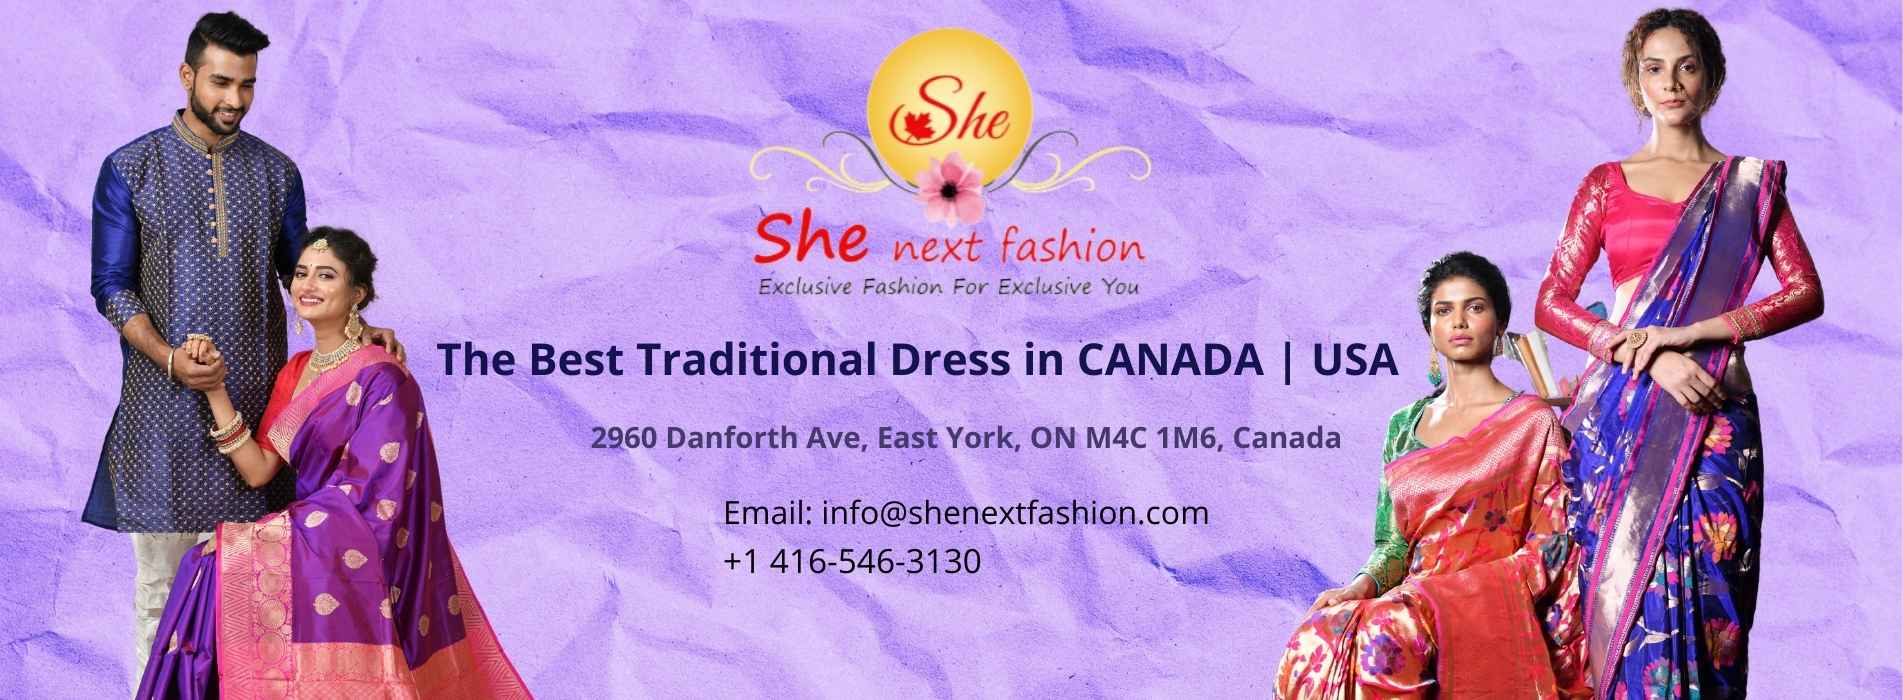 Best Traditional Wear in Canada, USA